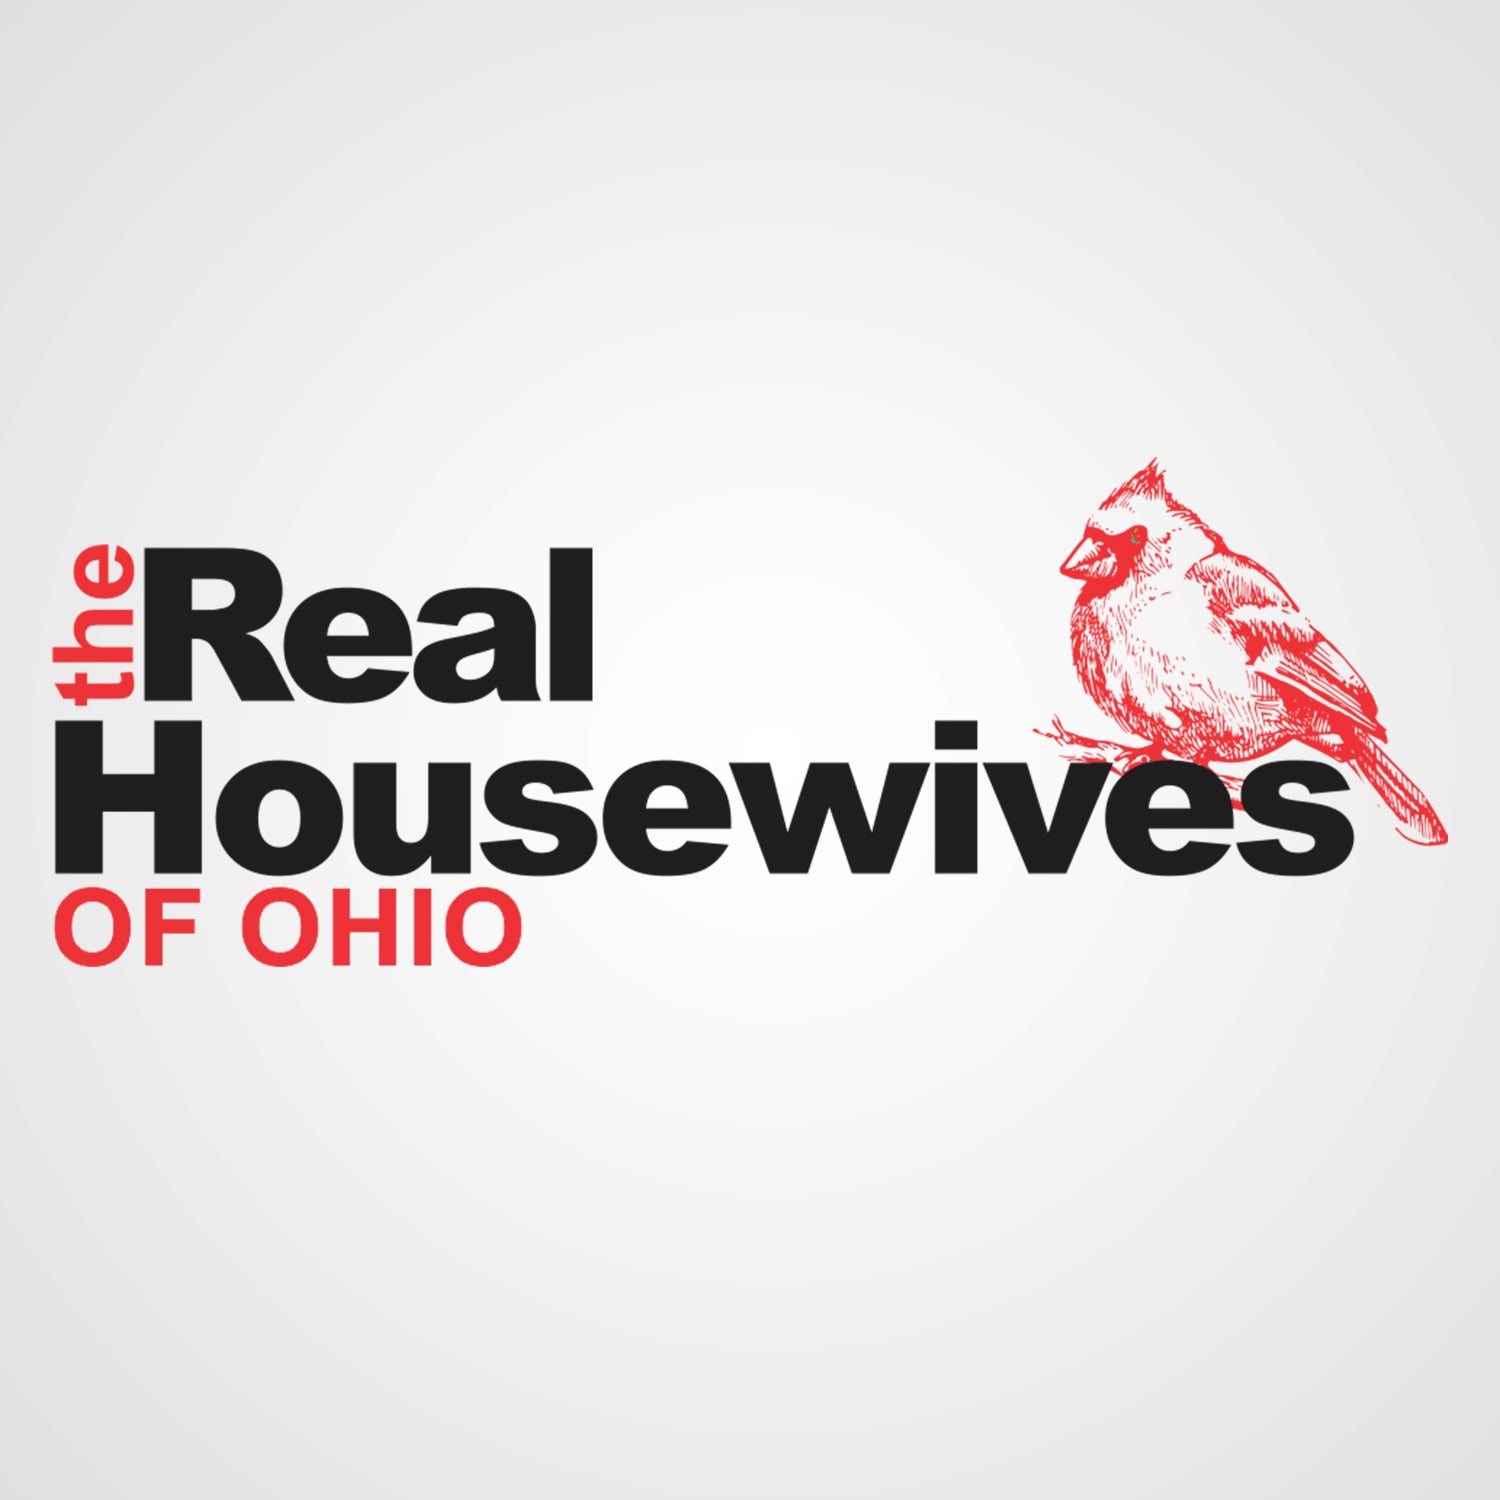 Real Housewifes of Ohio